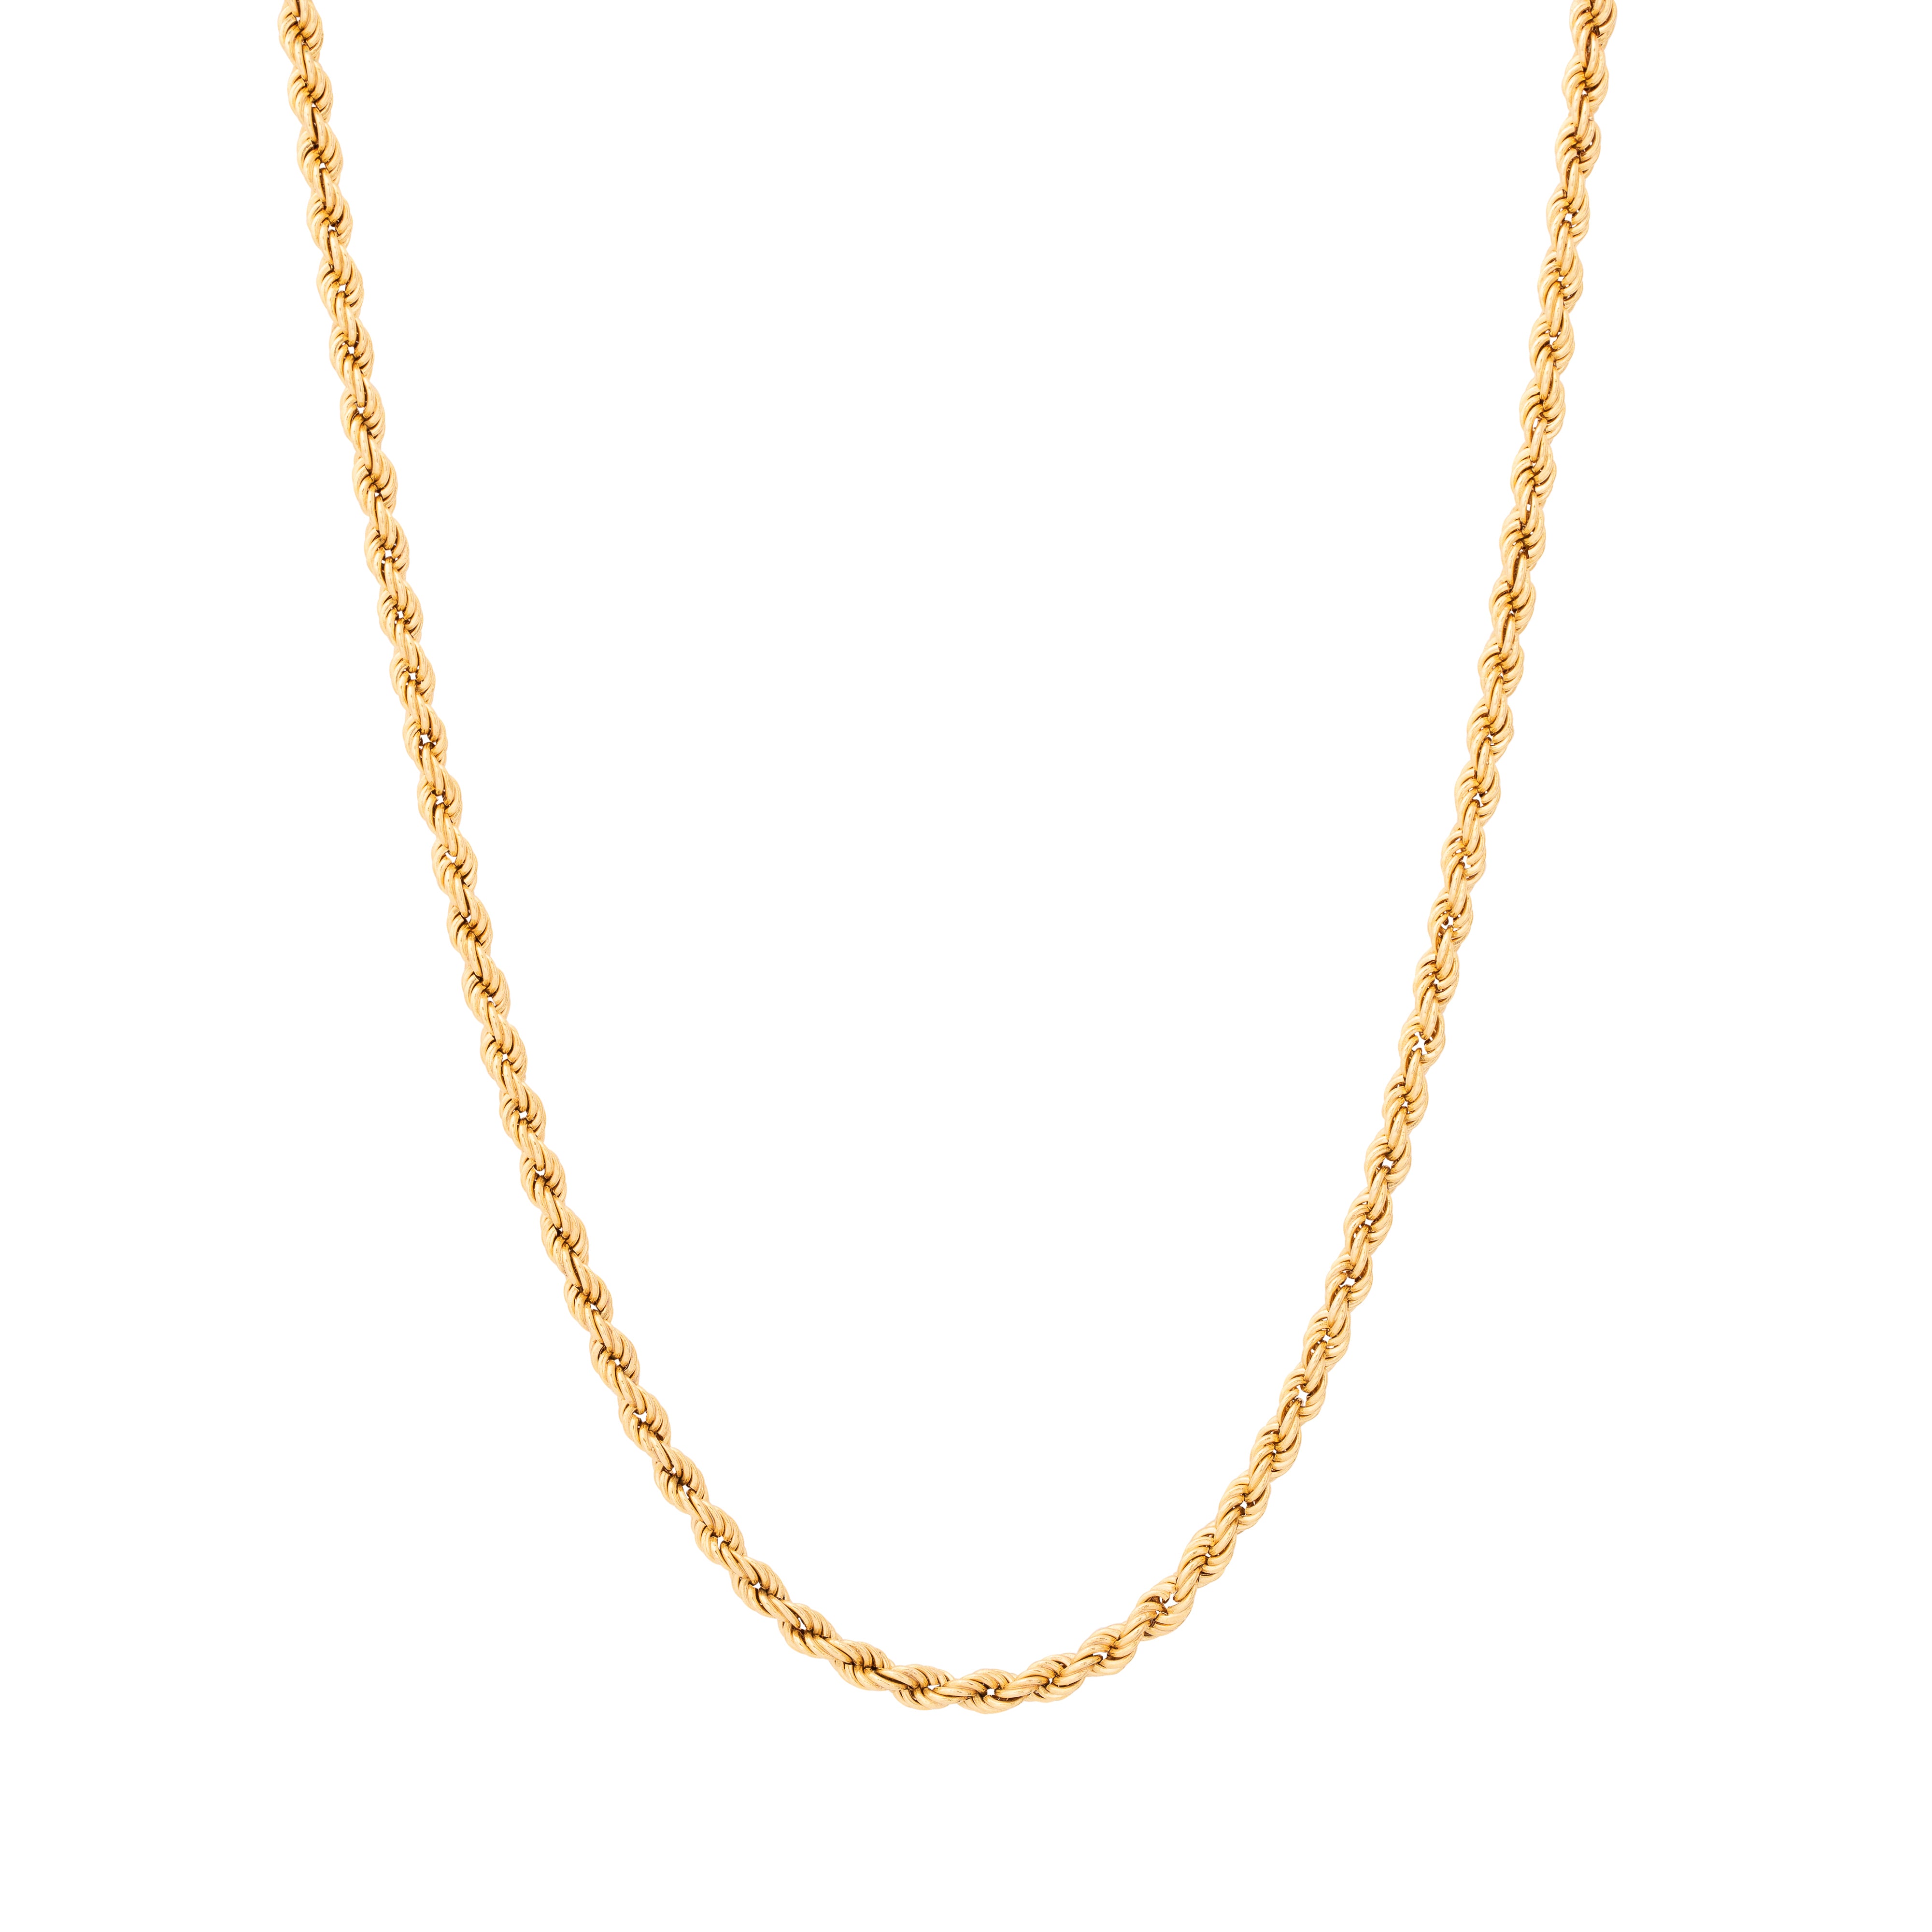 Roped 14k Gold 15" Chain Necklace